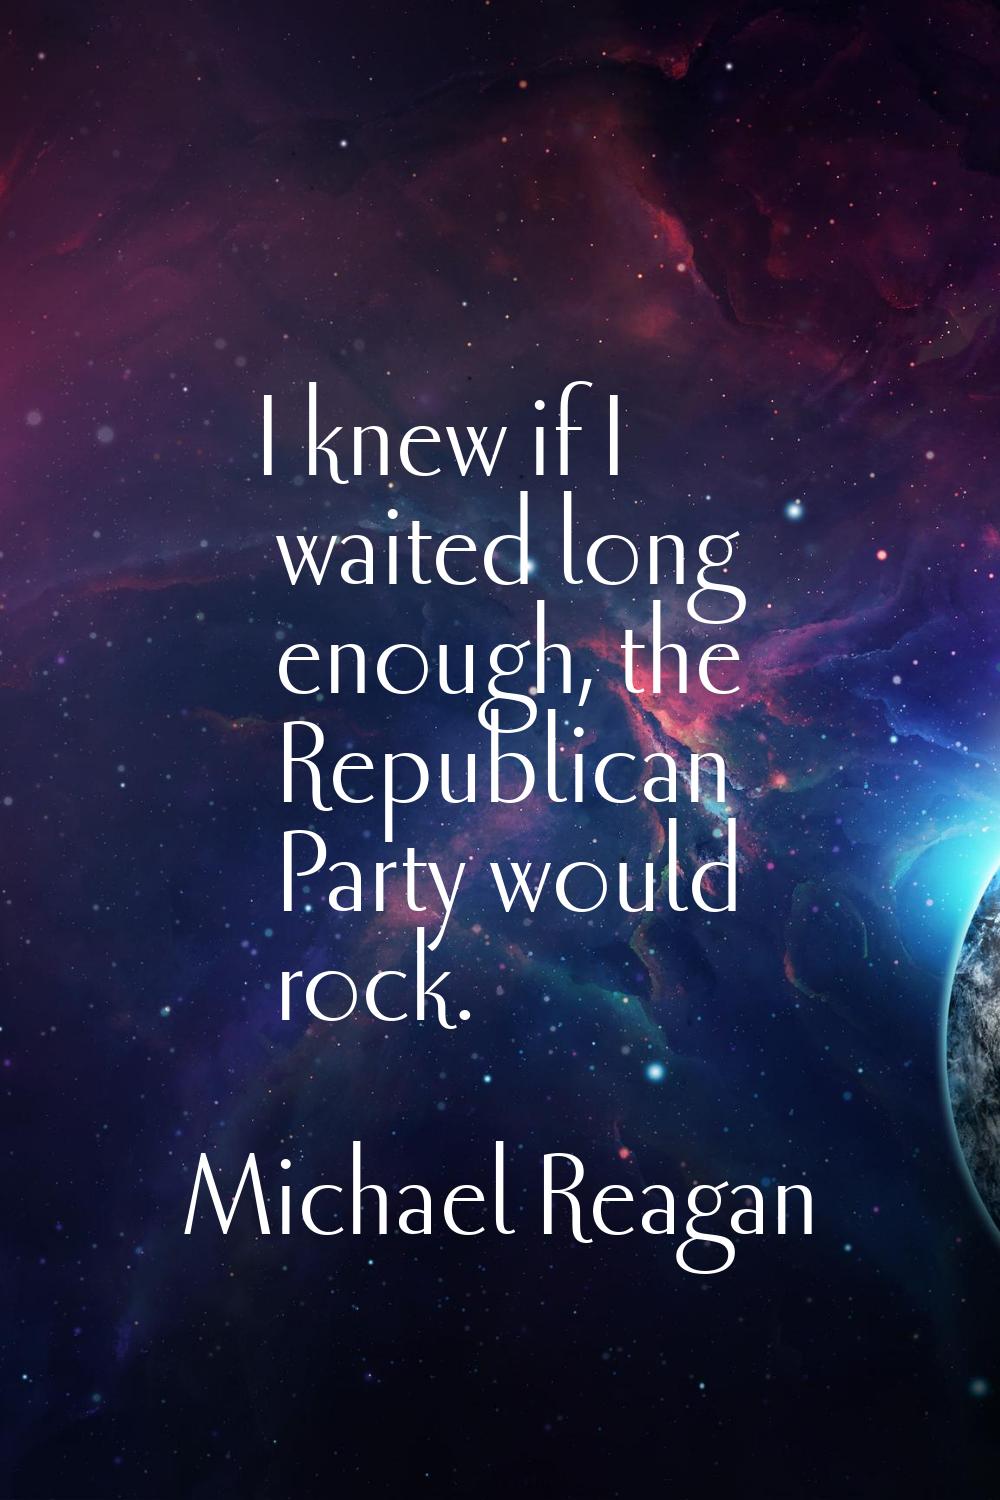 I knew if I waited long enough, the Republican Party would rock.